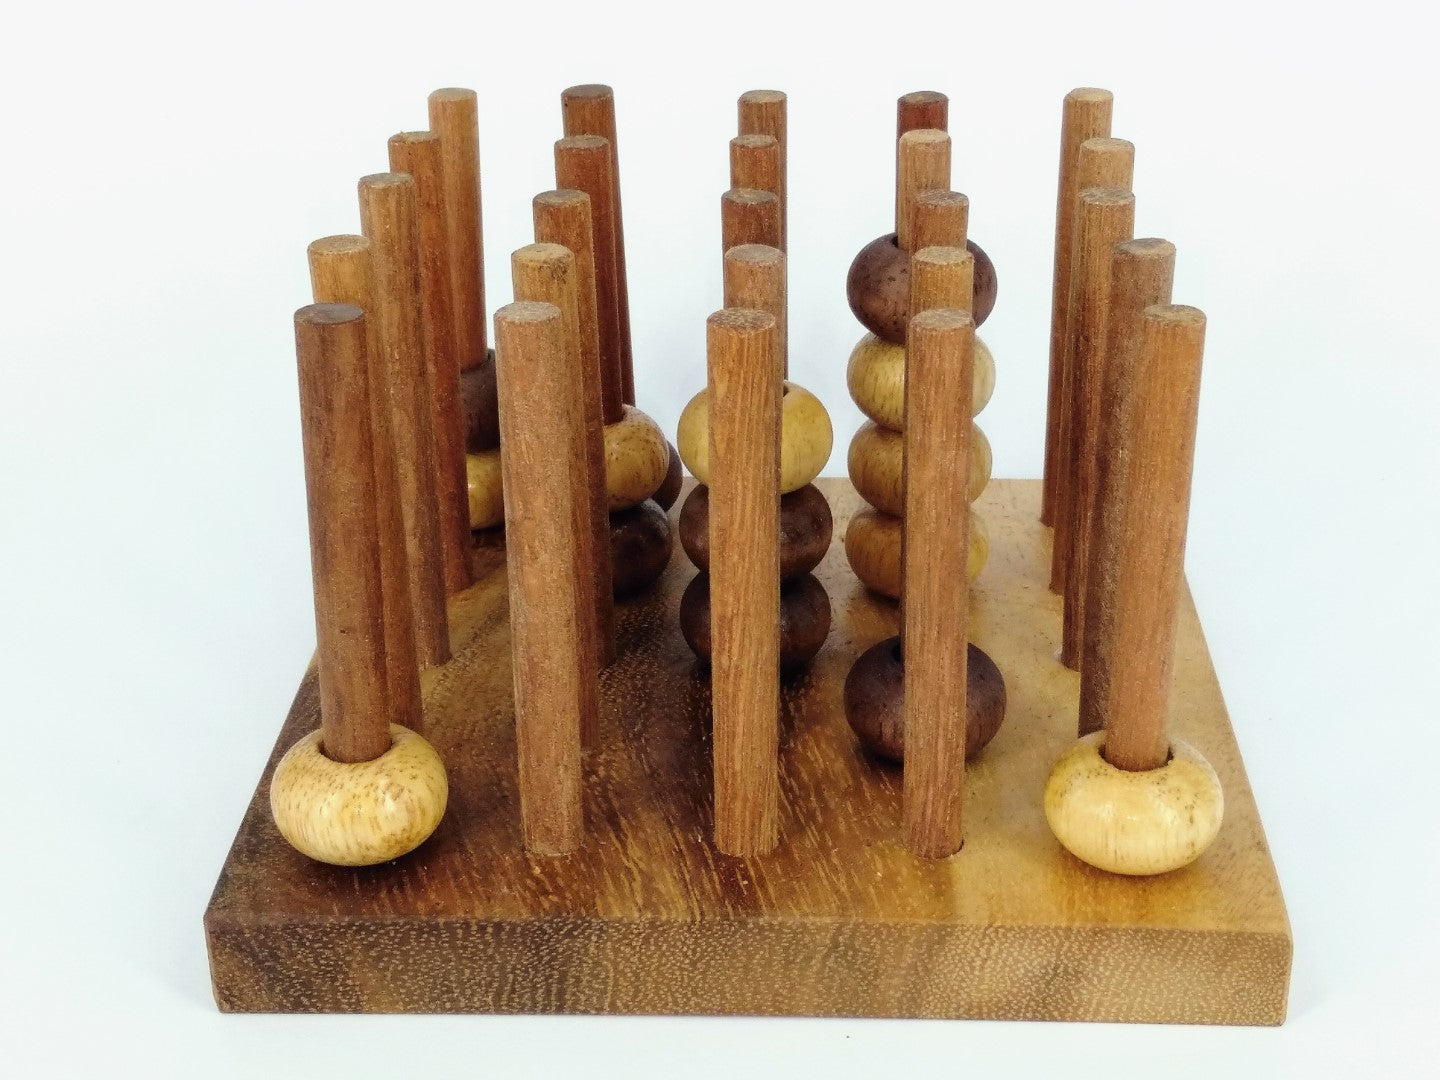 5X5 Inch Wooden Two Tik Tok Toe Game